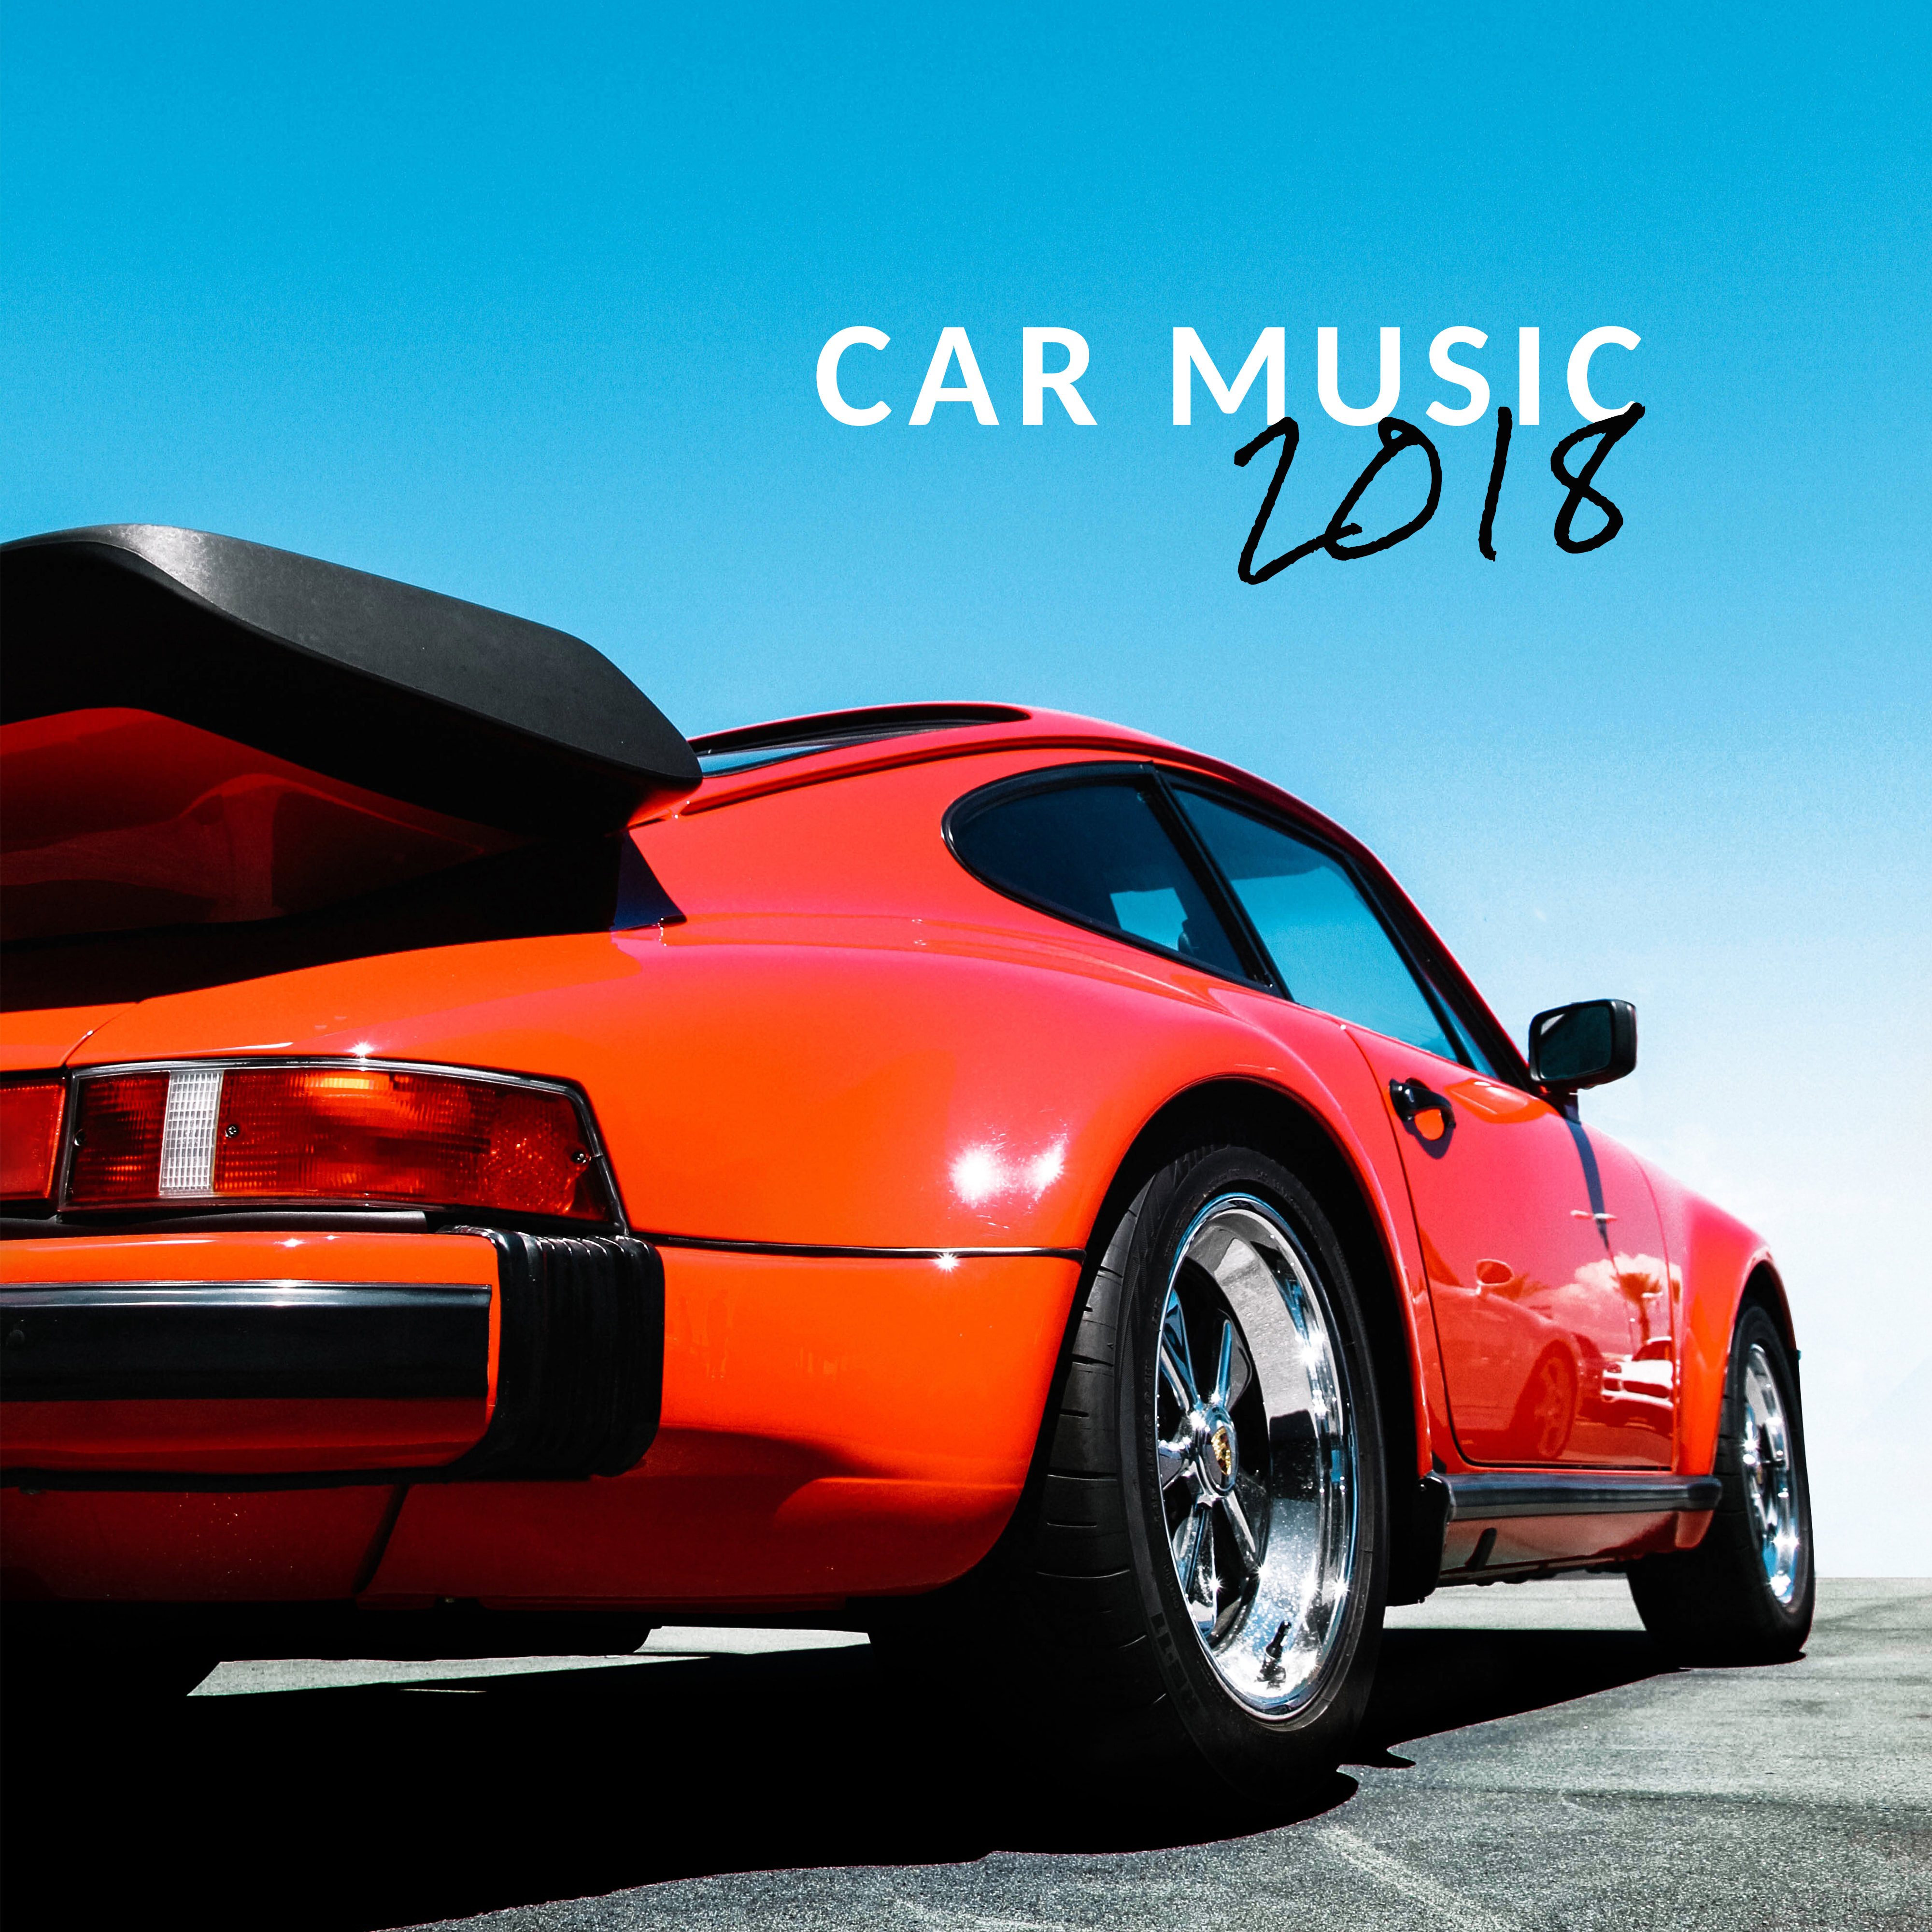 Car Music 2018: 15 Chillout Tracks